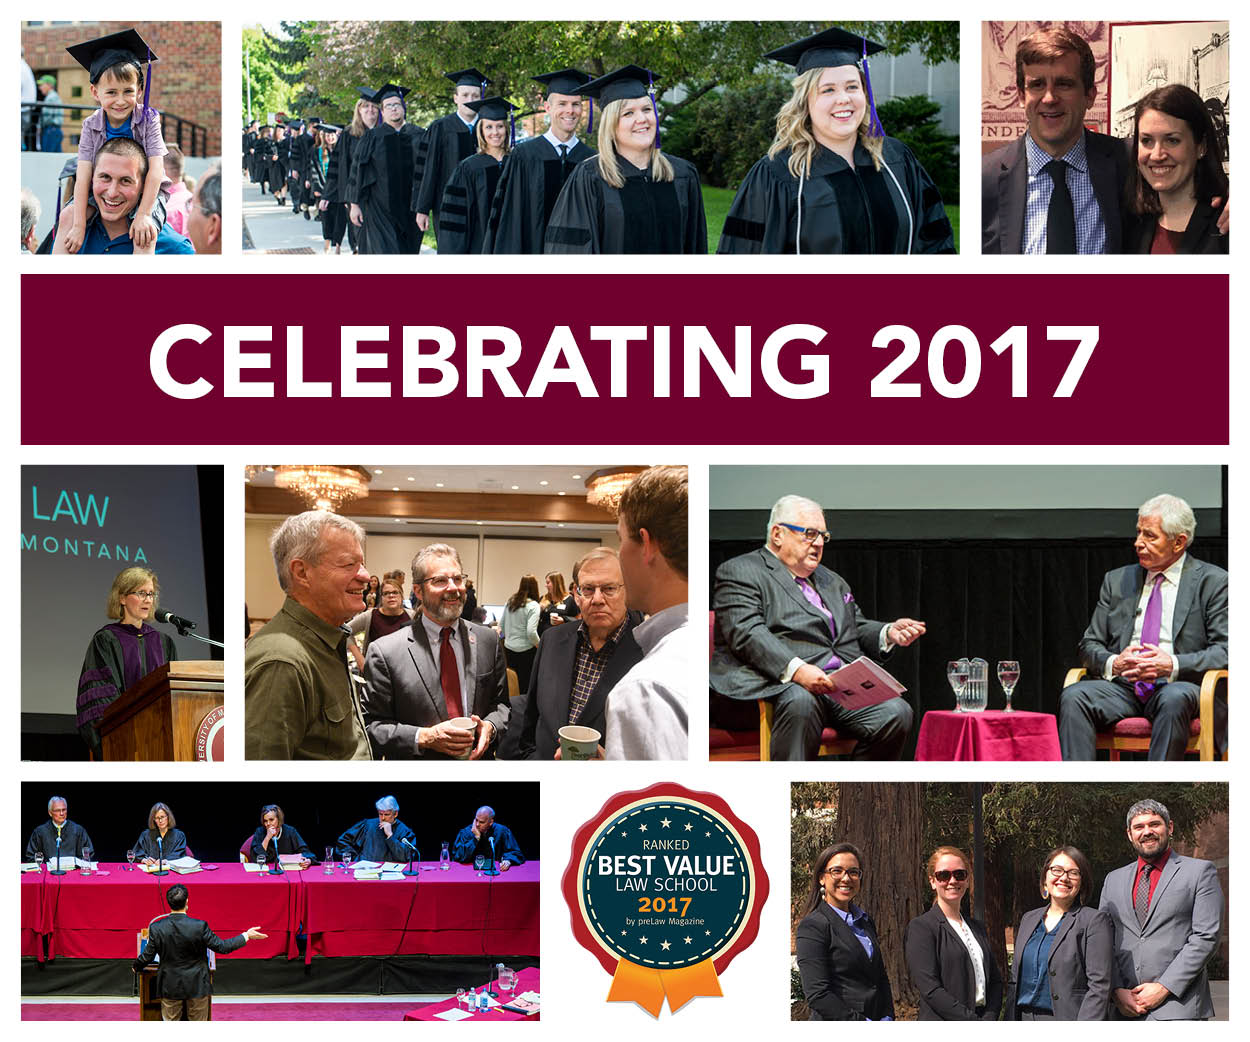 Collage of photos from Blewett School of Law events, including graduation ceremony and students posing